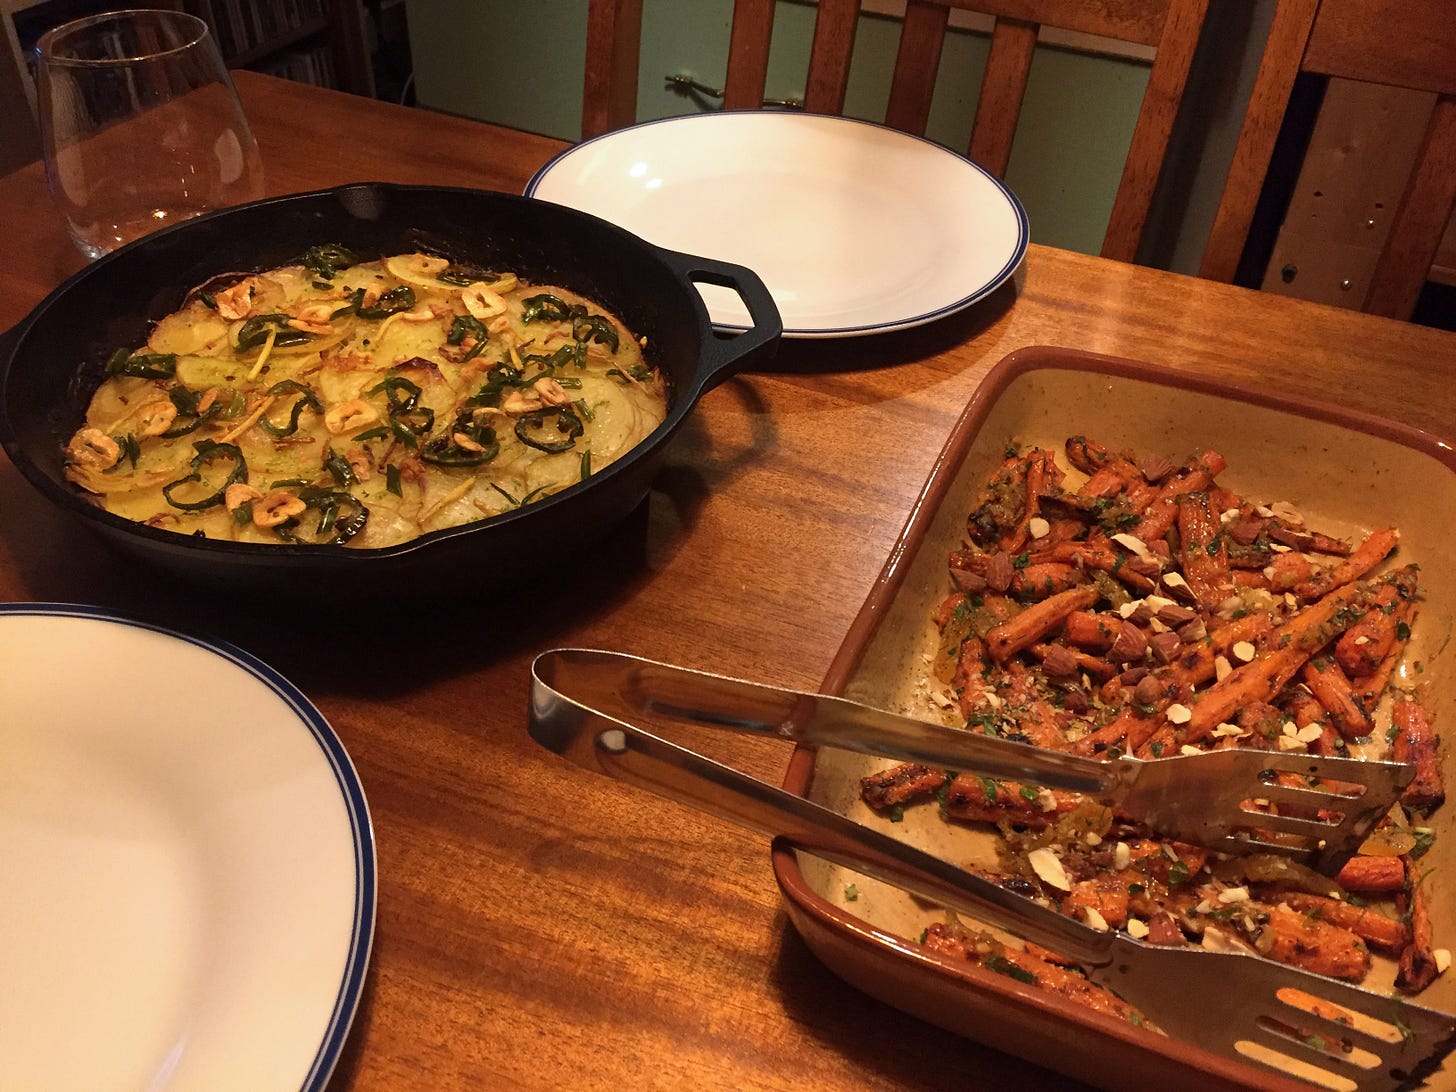 a cast iron pan of potato gratin topped with fried chilies and garlic sits between two empty plates. To the right, a serving dish of carrots speckled with herbs and chopped nuts.